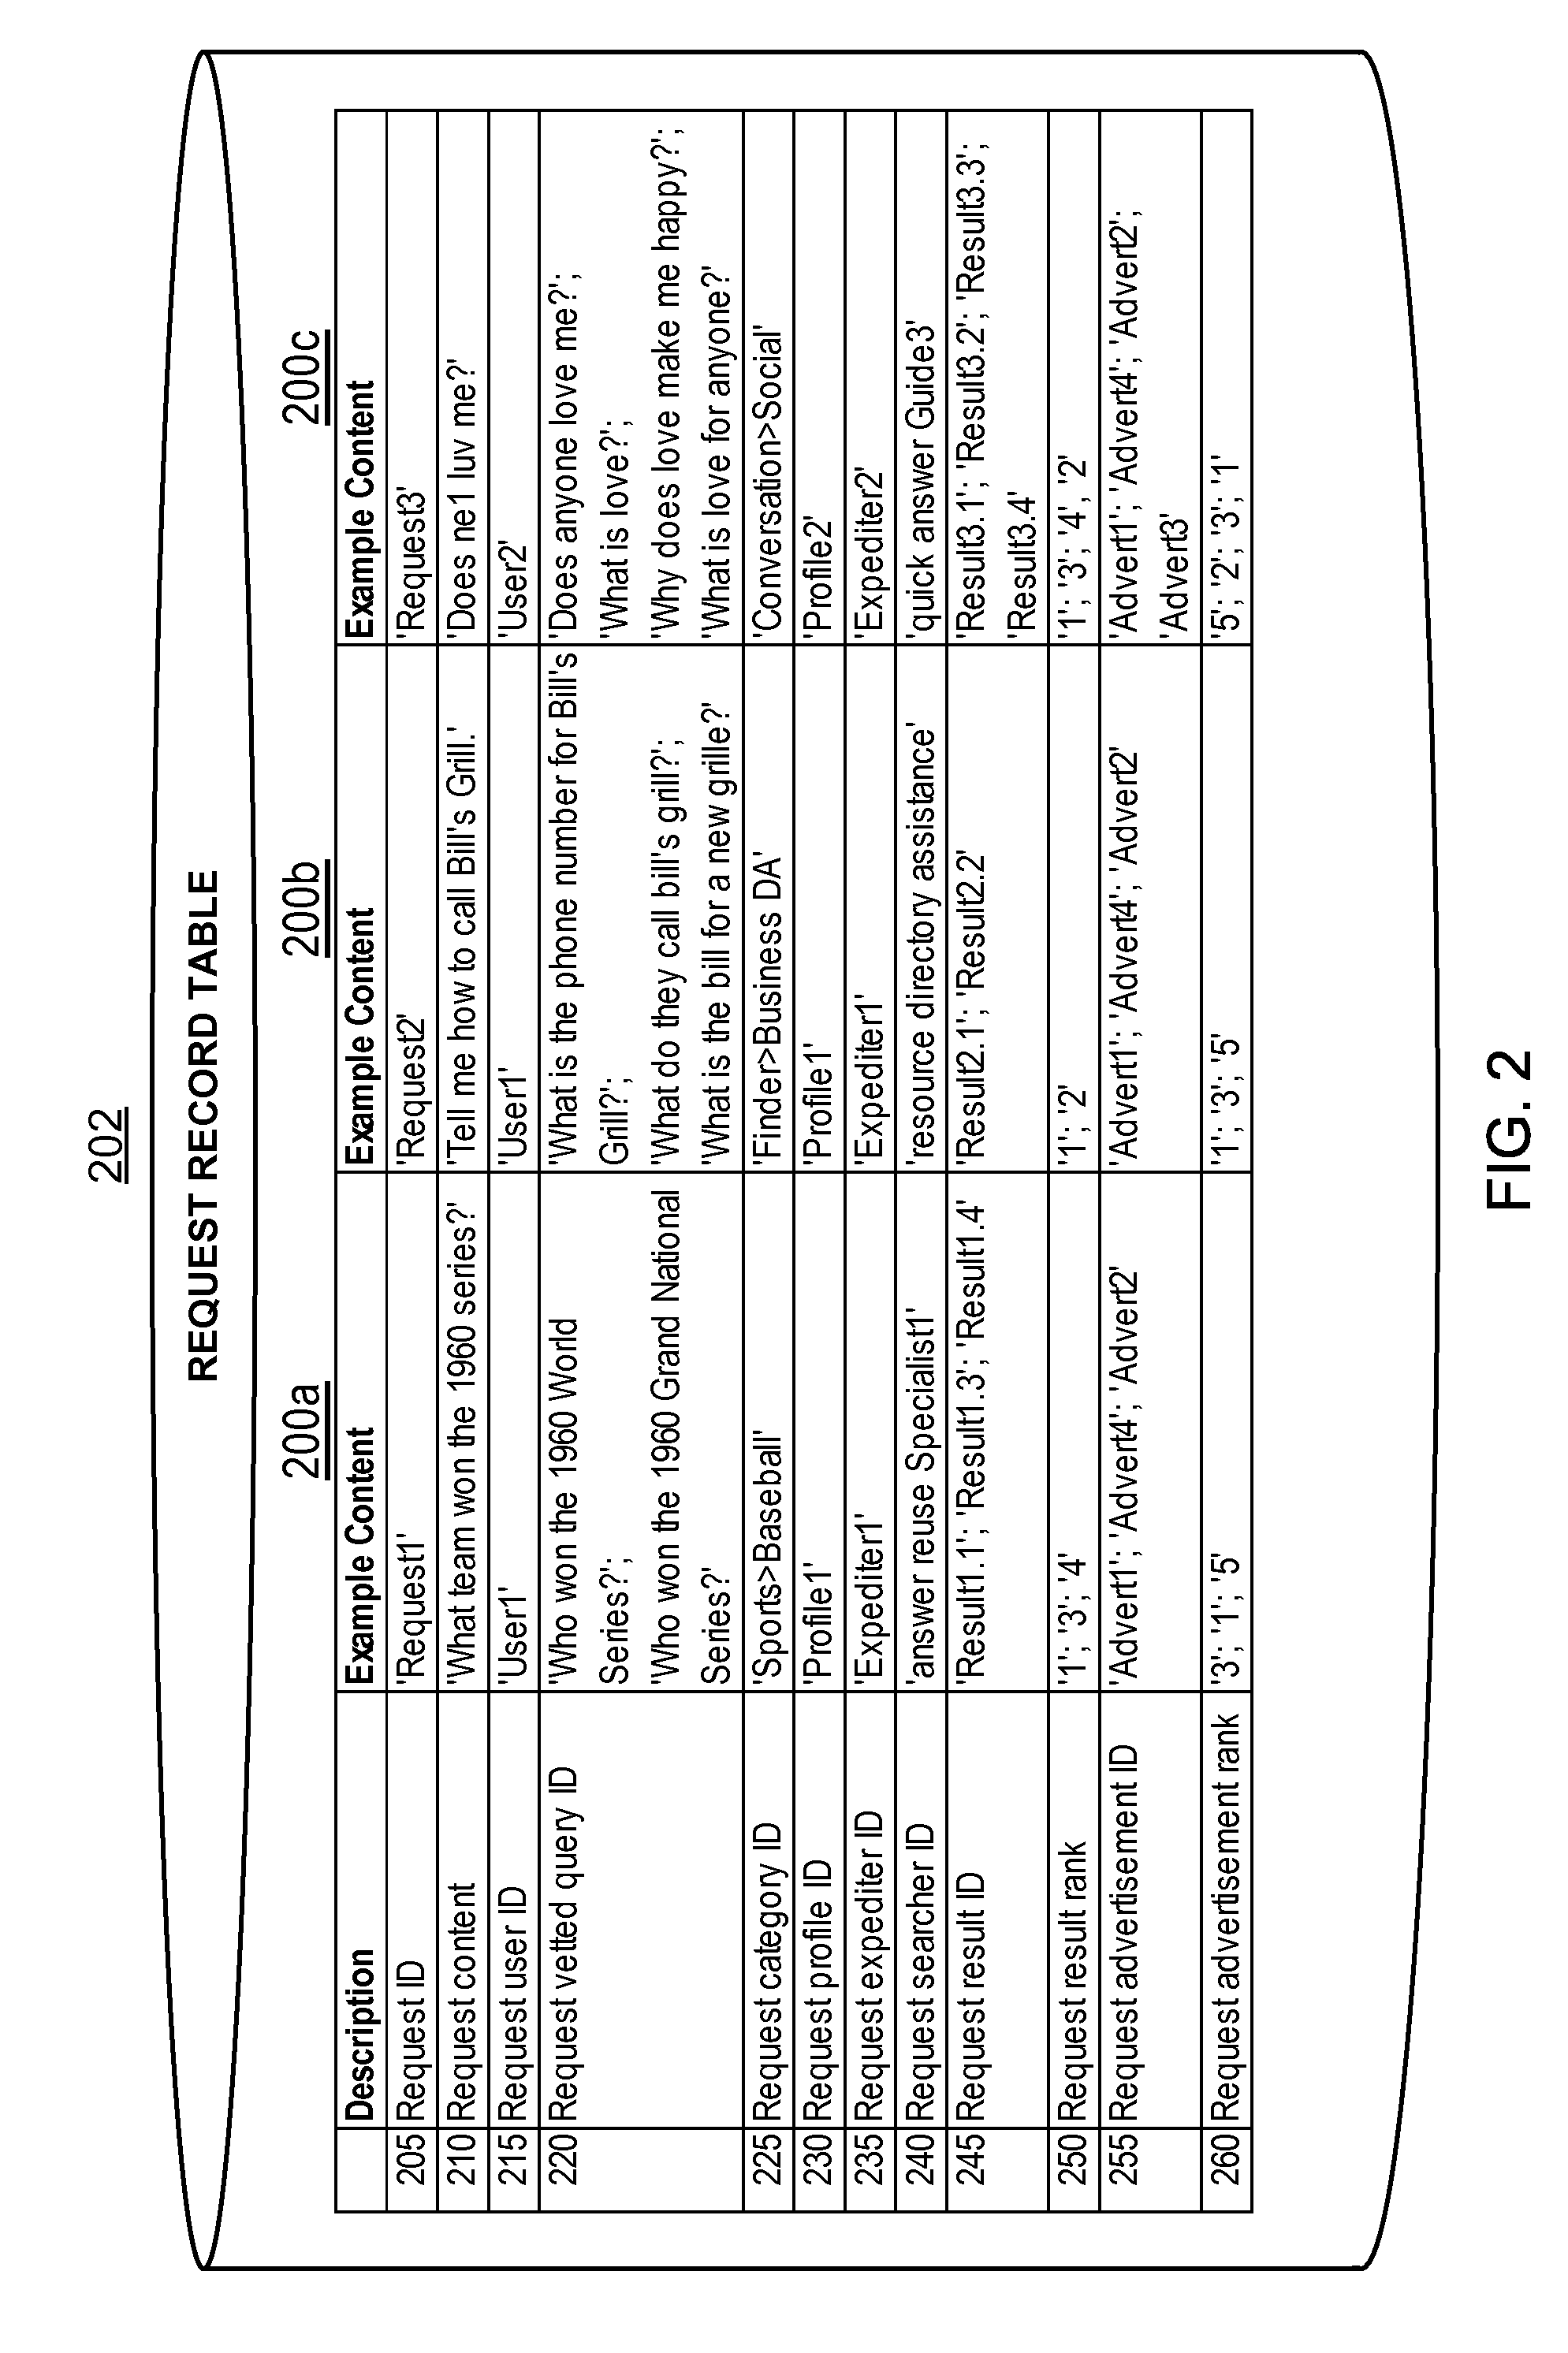 Method and system of providing a search tool